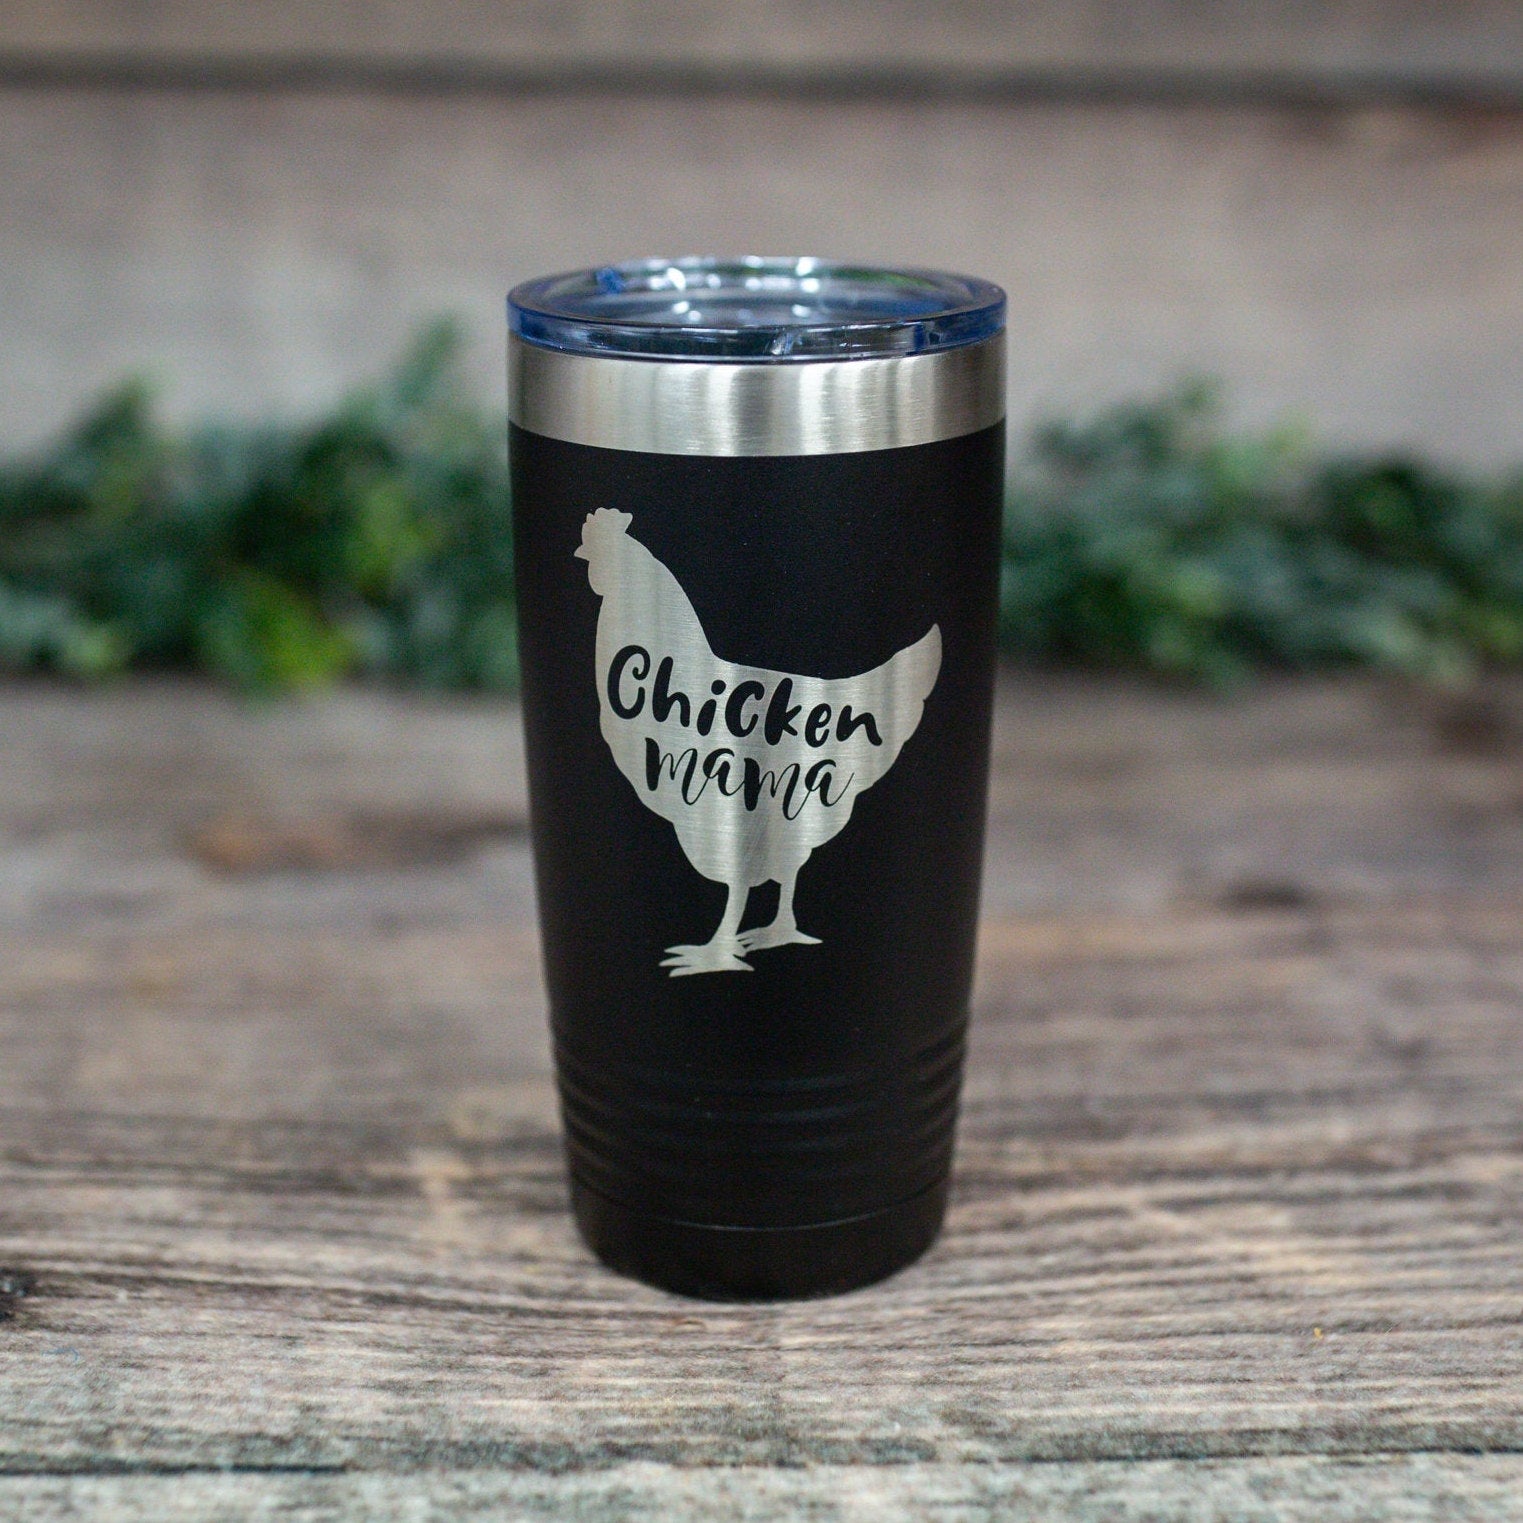 Chicken Mama - Engraved Stainless Steel Tumbler, Funny Adult Humor Gift,  Farm Humor Tumbler